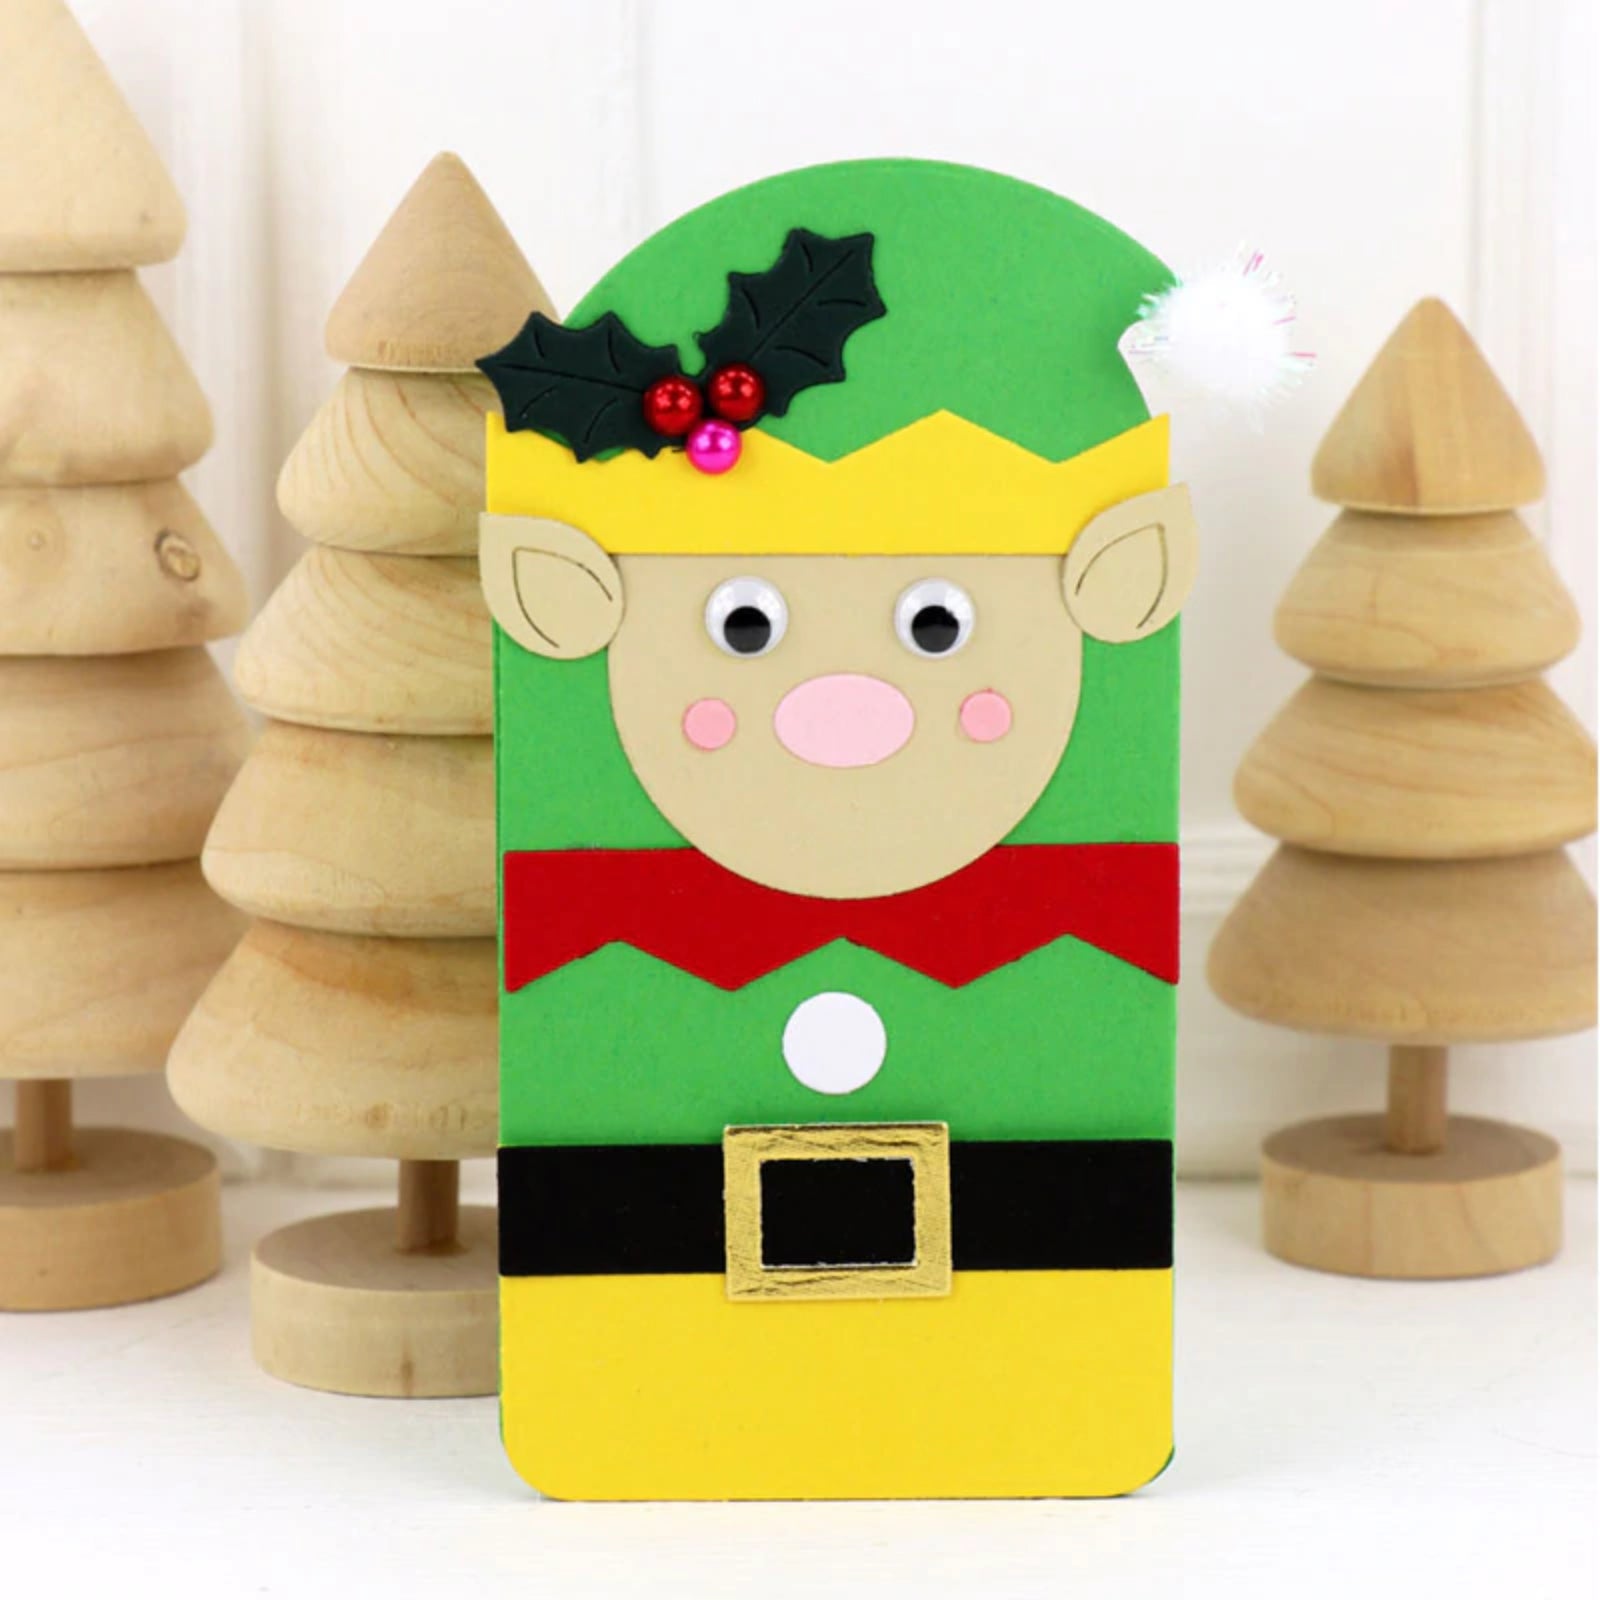 Christmas Characters w Gift Card Holder / Tag Mega Cutting Dies Set